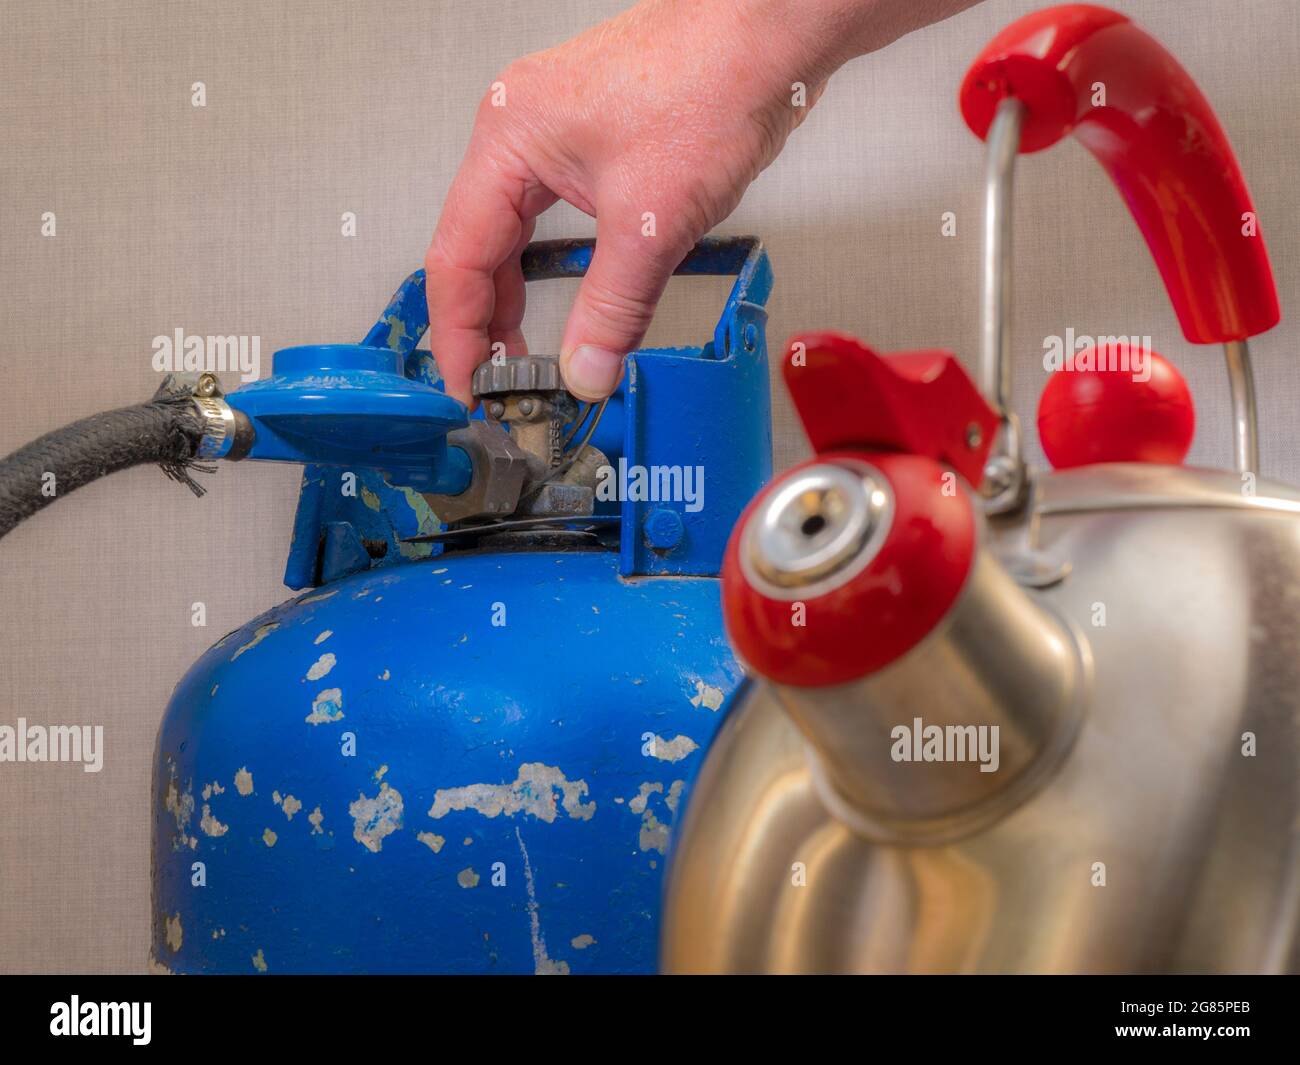 A steel rounded kettle blurred in the foreground, then behind in focus, a man’s fingers loosening the tap on an old blue painted, portable gas bottle. Stock Photo